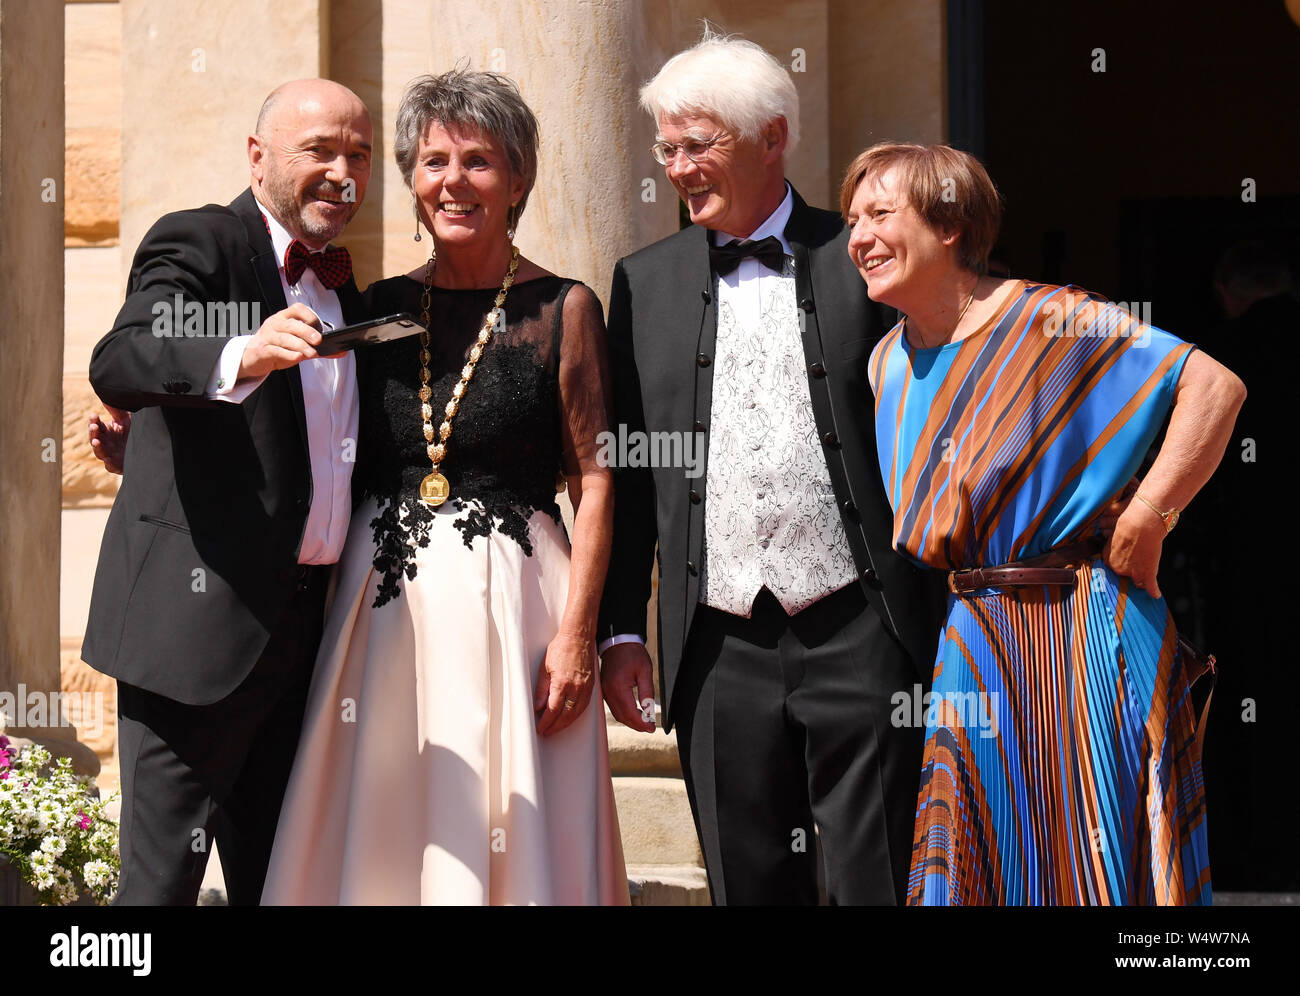 Bayreuth, Germany. 25th July, 2019. The former ski racers Rosi Mittermaier-Neureuther (r) and Christian Neureuther (l) arrive at the beginning of the Bayreuth Festival 2019 and are welcomed by the Mayor of Bayreuth Brigitte Merk-Erbe and her husband Thomas. The Richard Wagner Festival begins in Bayreuth on Thursday. Numerous celebrities are expected on the red carpet. (To dpa 'Bayreuth Festival start in heat with new 'Tannhäuser'') Credit: Tobias Hase/dpa/Alamy Live News Stock Photo